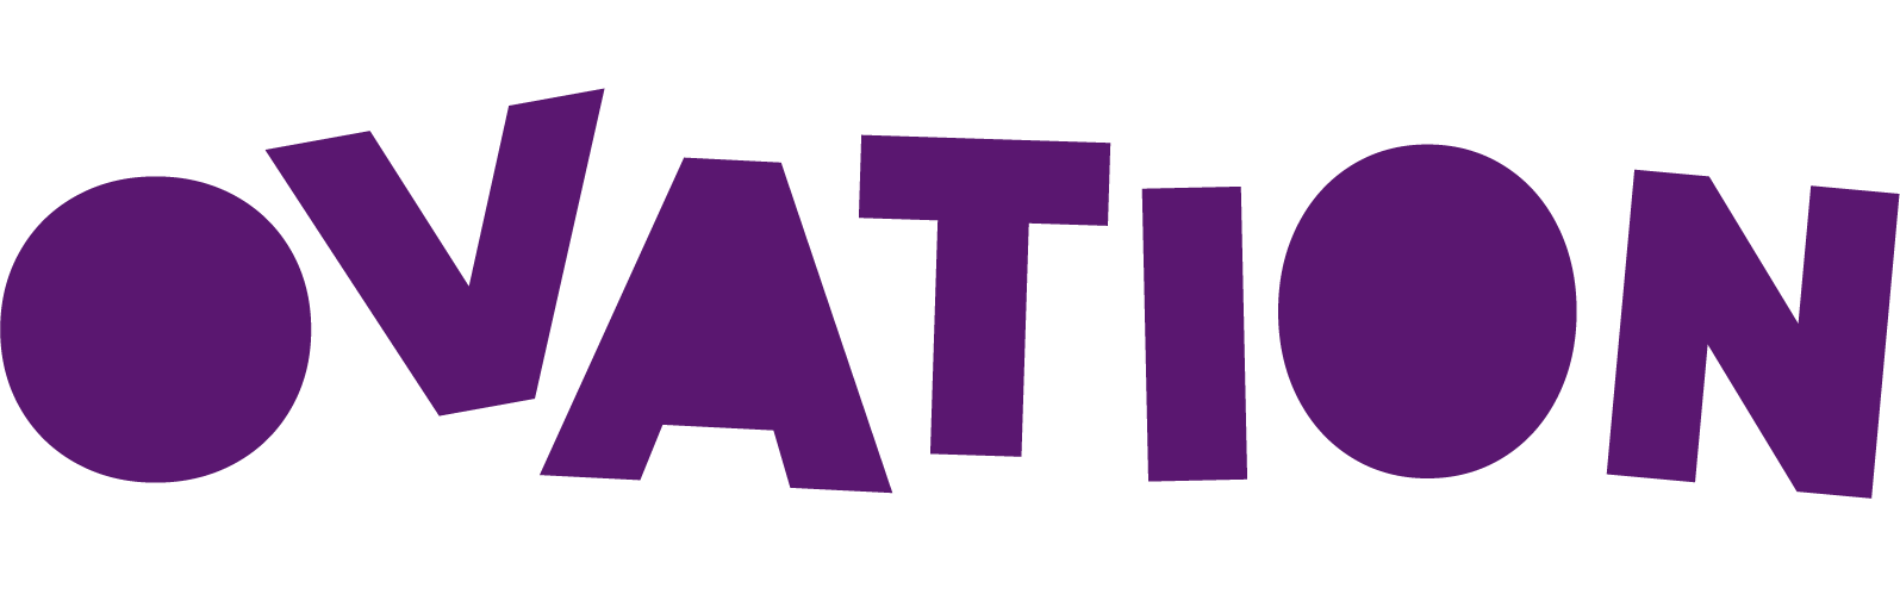 The word Ovation in stylized purple text with a white background.